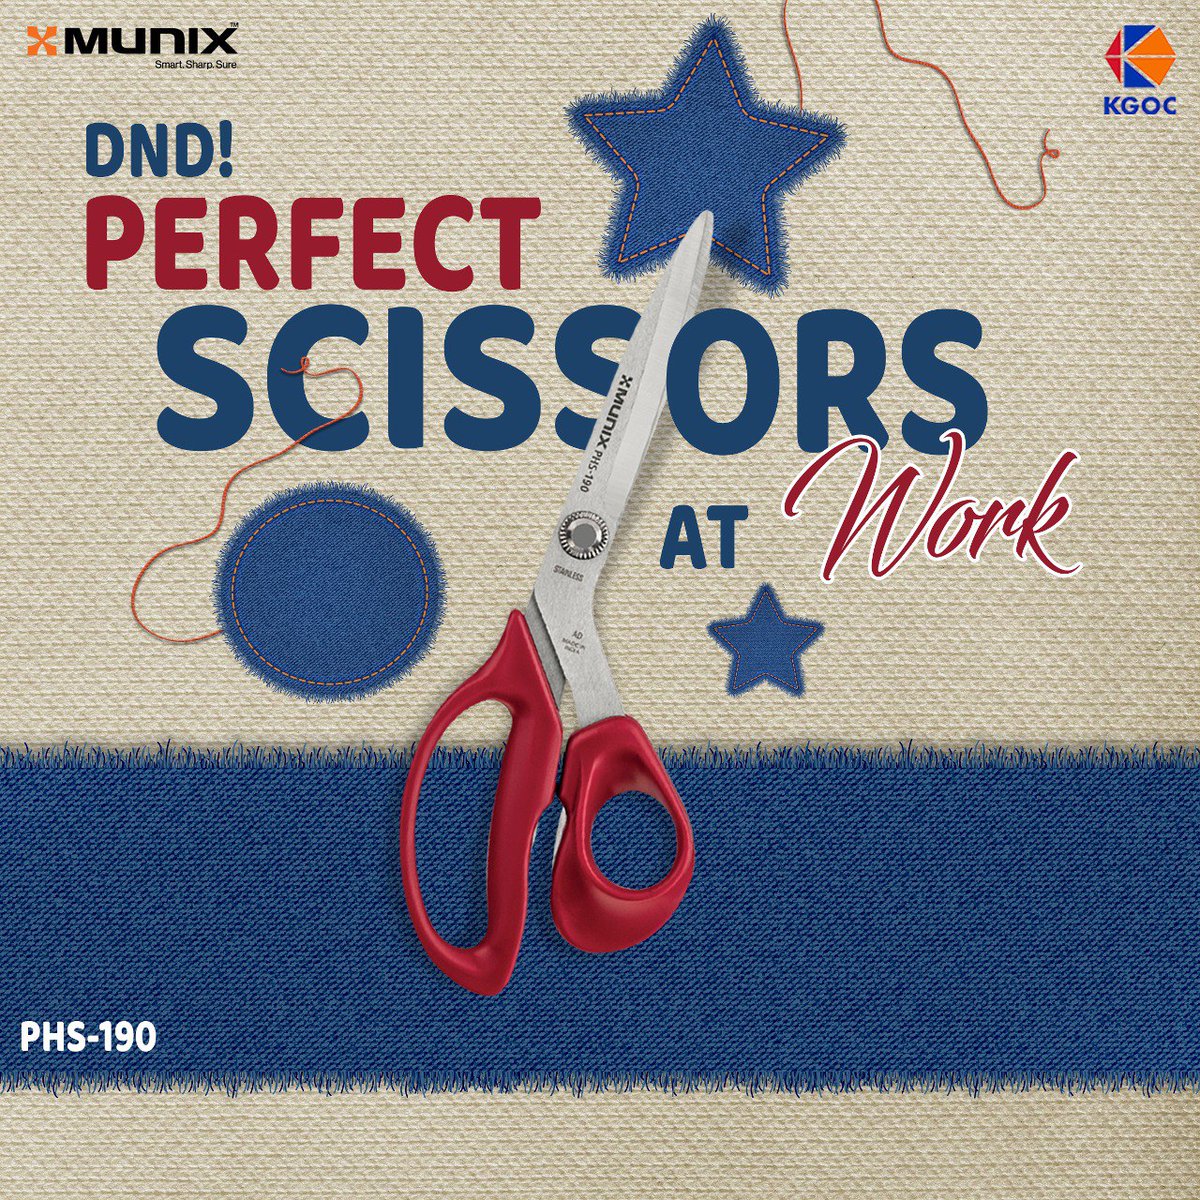 Channeling your inner wizard with these flawless scissors at work! #munix #kgoc